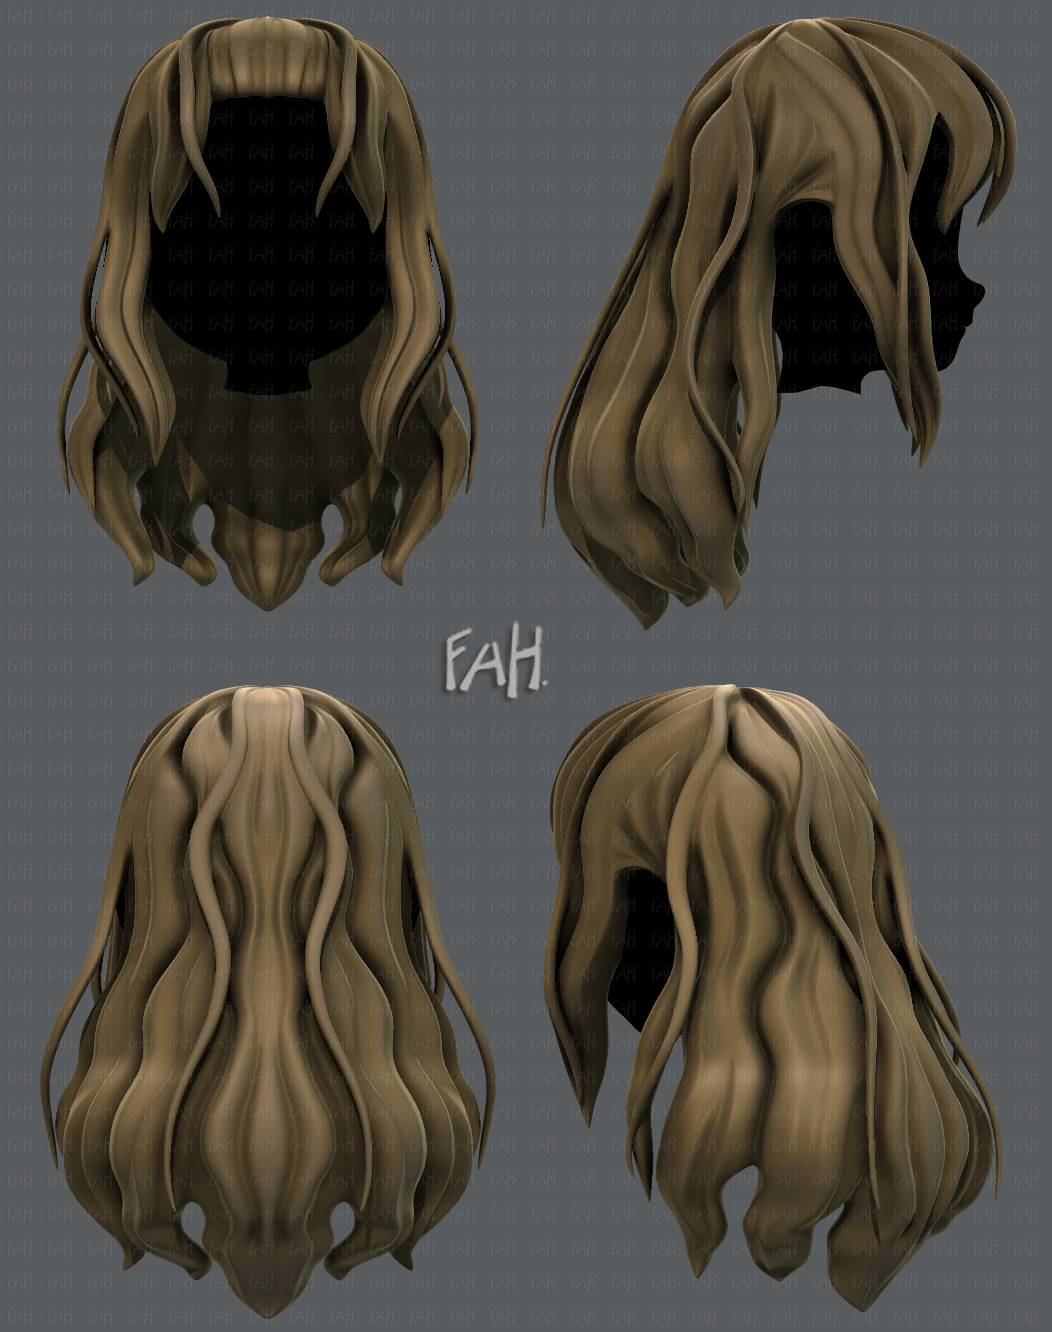 3D Hair style for girl V82 3D Model $15 - .3ds .dae .fbx .ma .max .obj  .unknown - Free3D